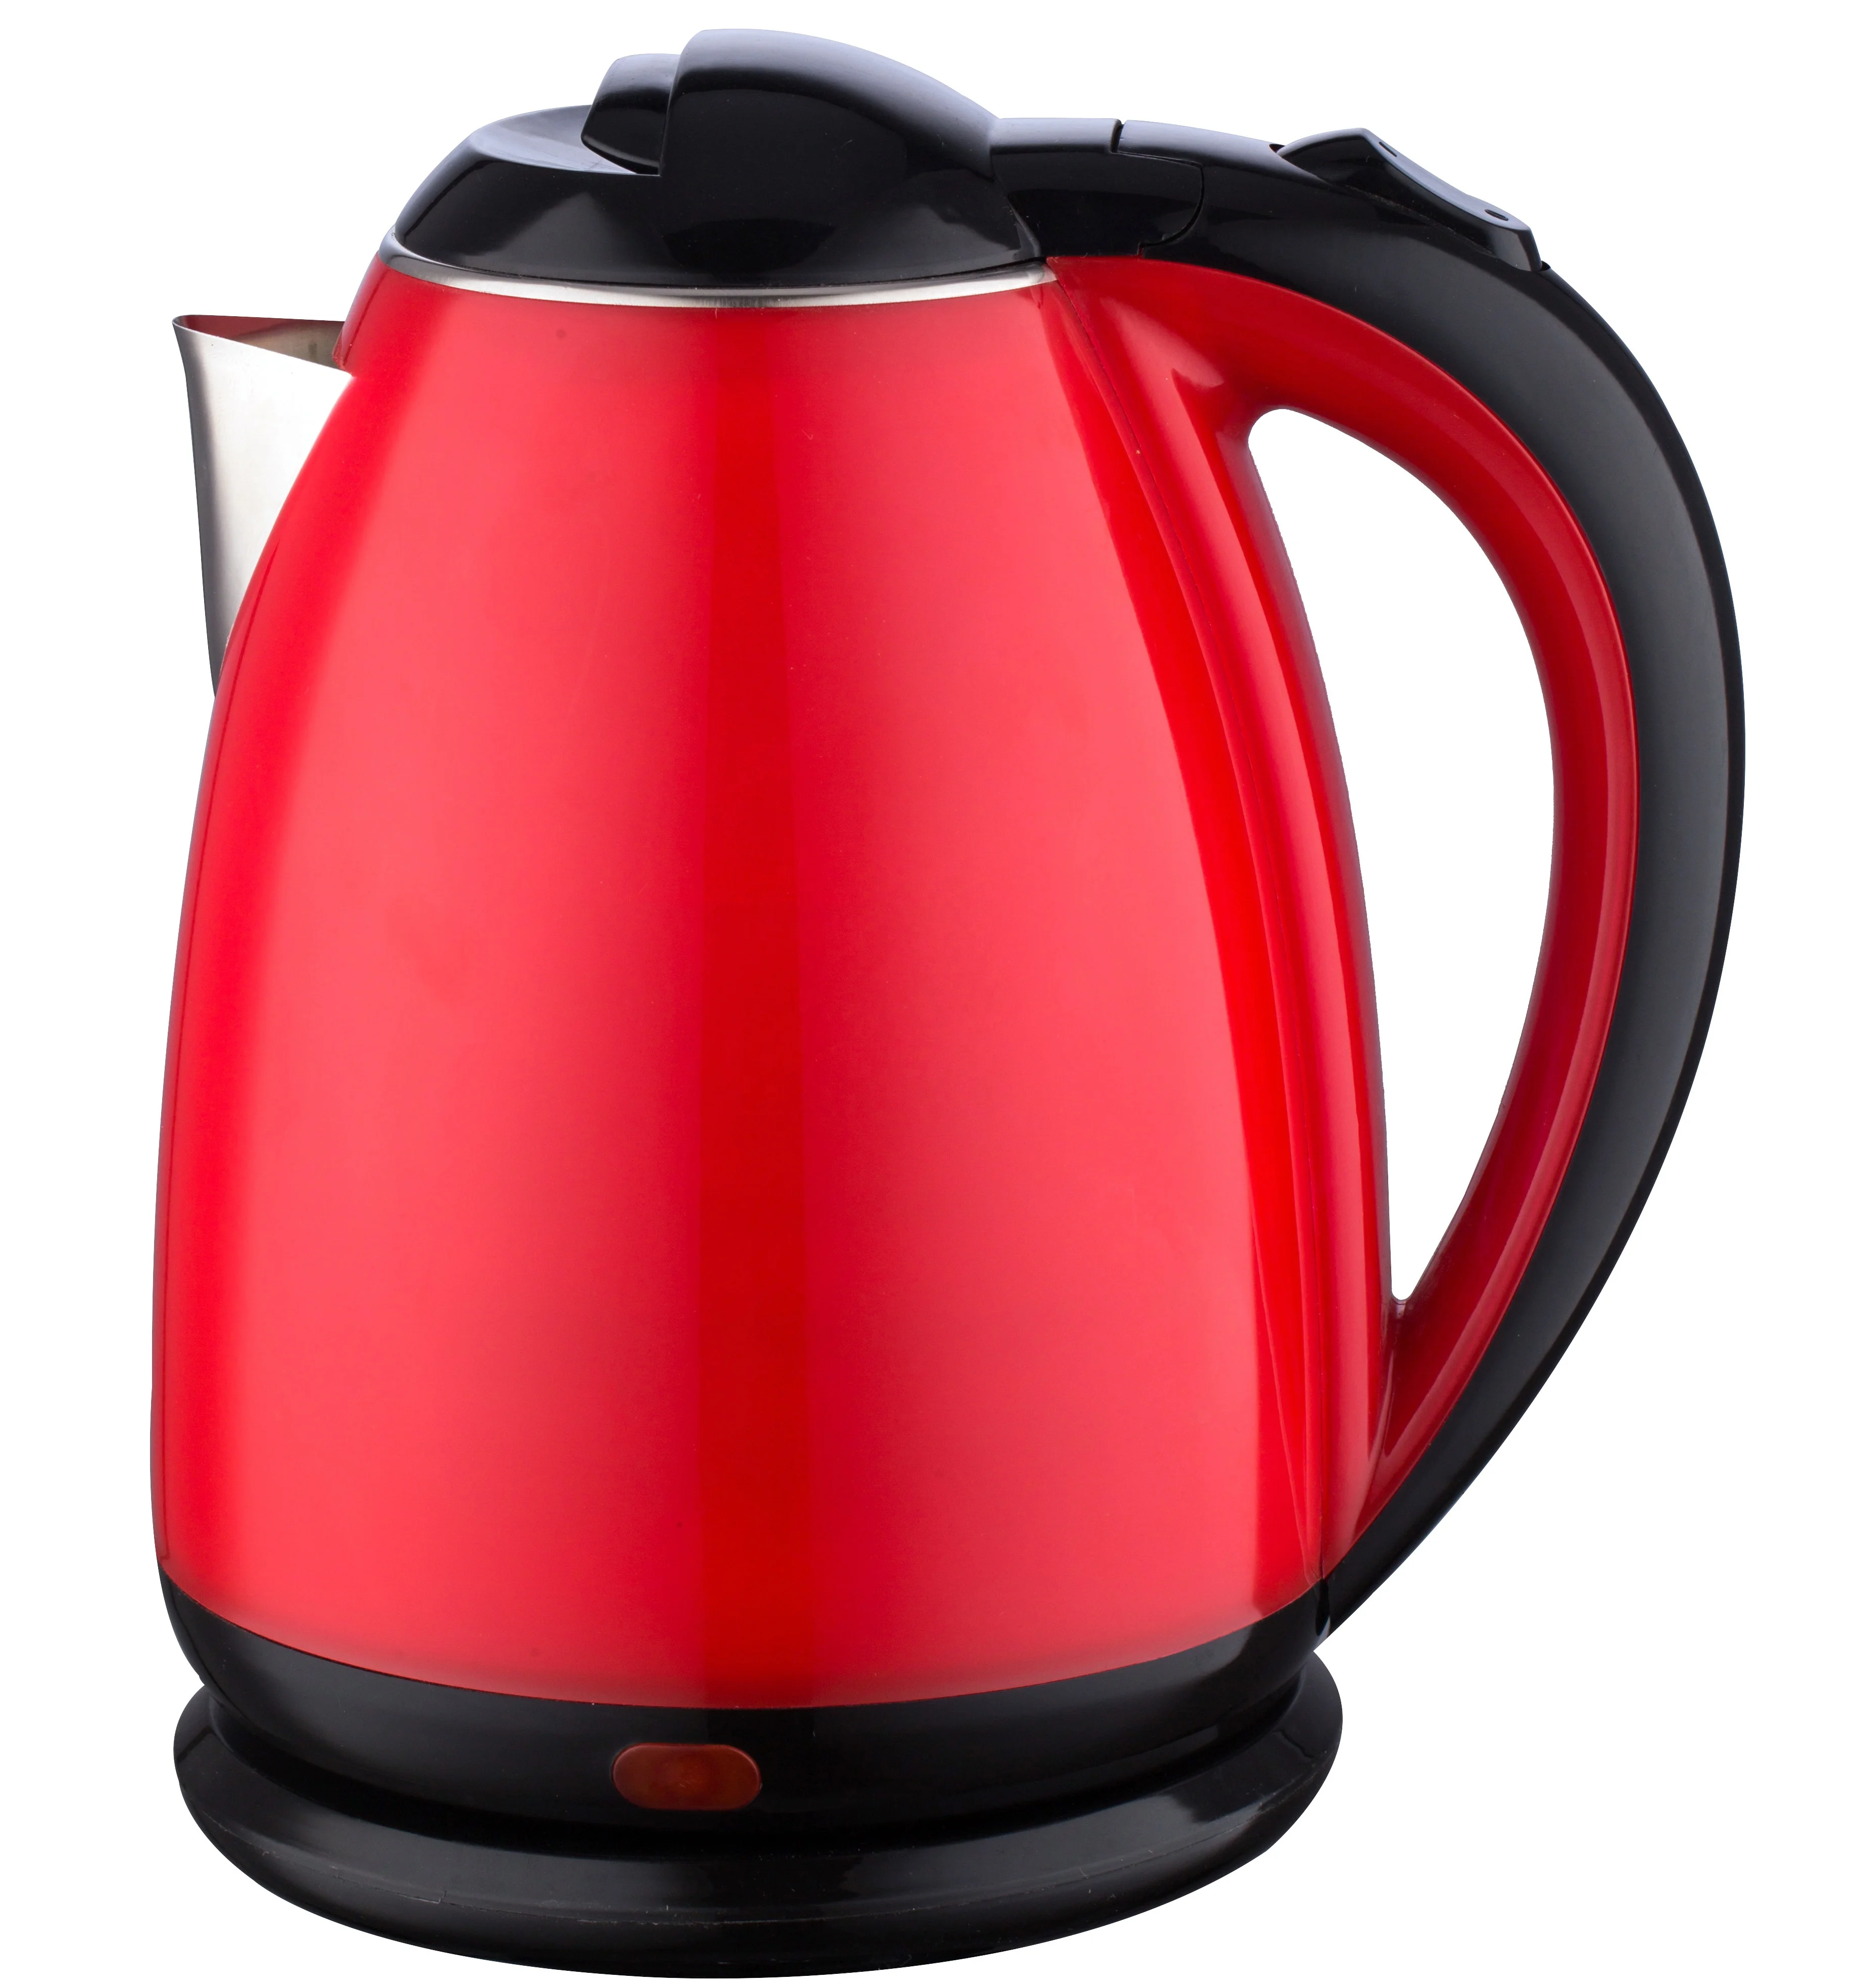 Deluxe PP jacketed scald-resistant electric kettle